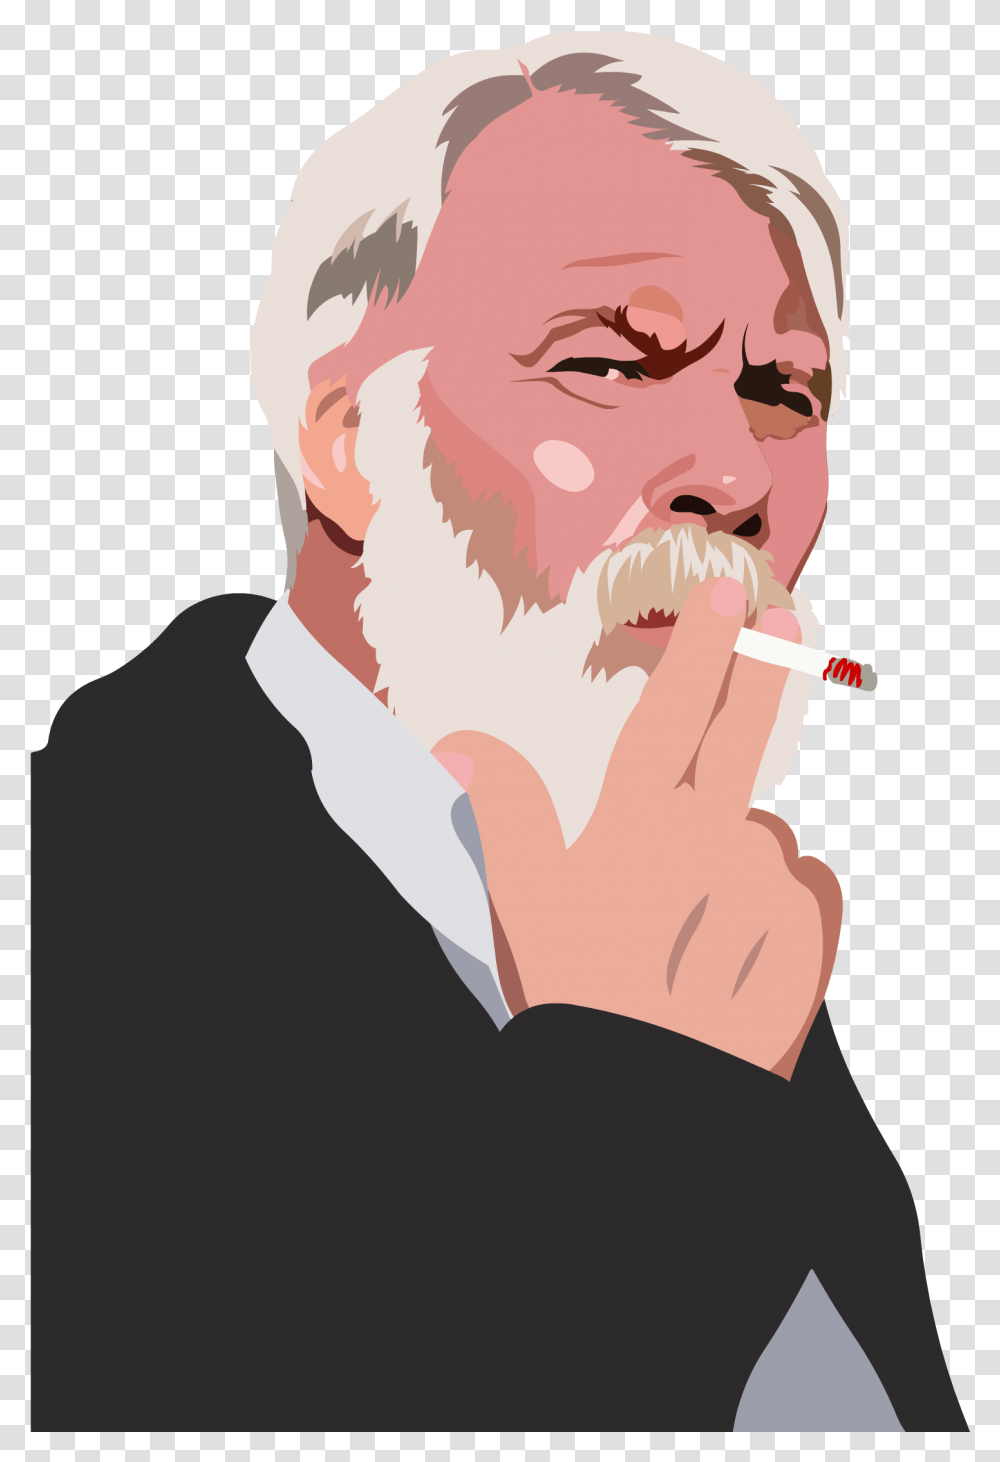 Snappygoatcom Free Public Domain Images Snappygoatcom Man Smoking, Face, Person, Smoke, Mustache Transparent Png